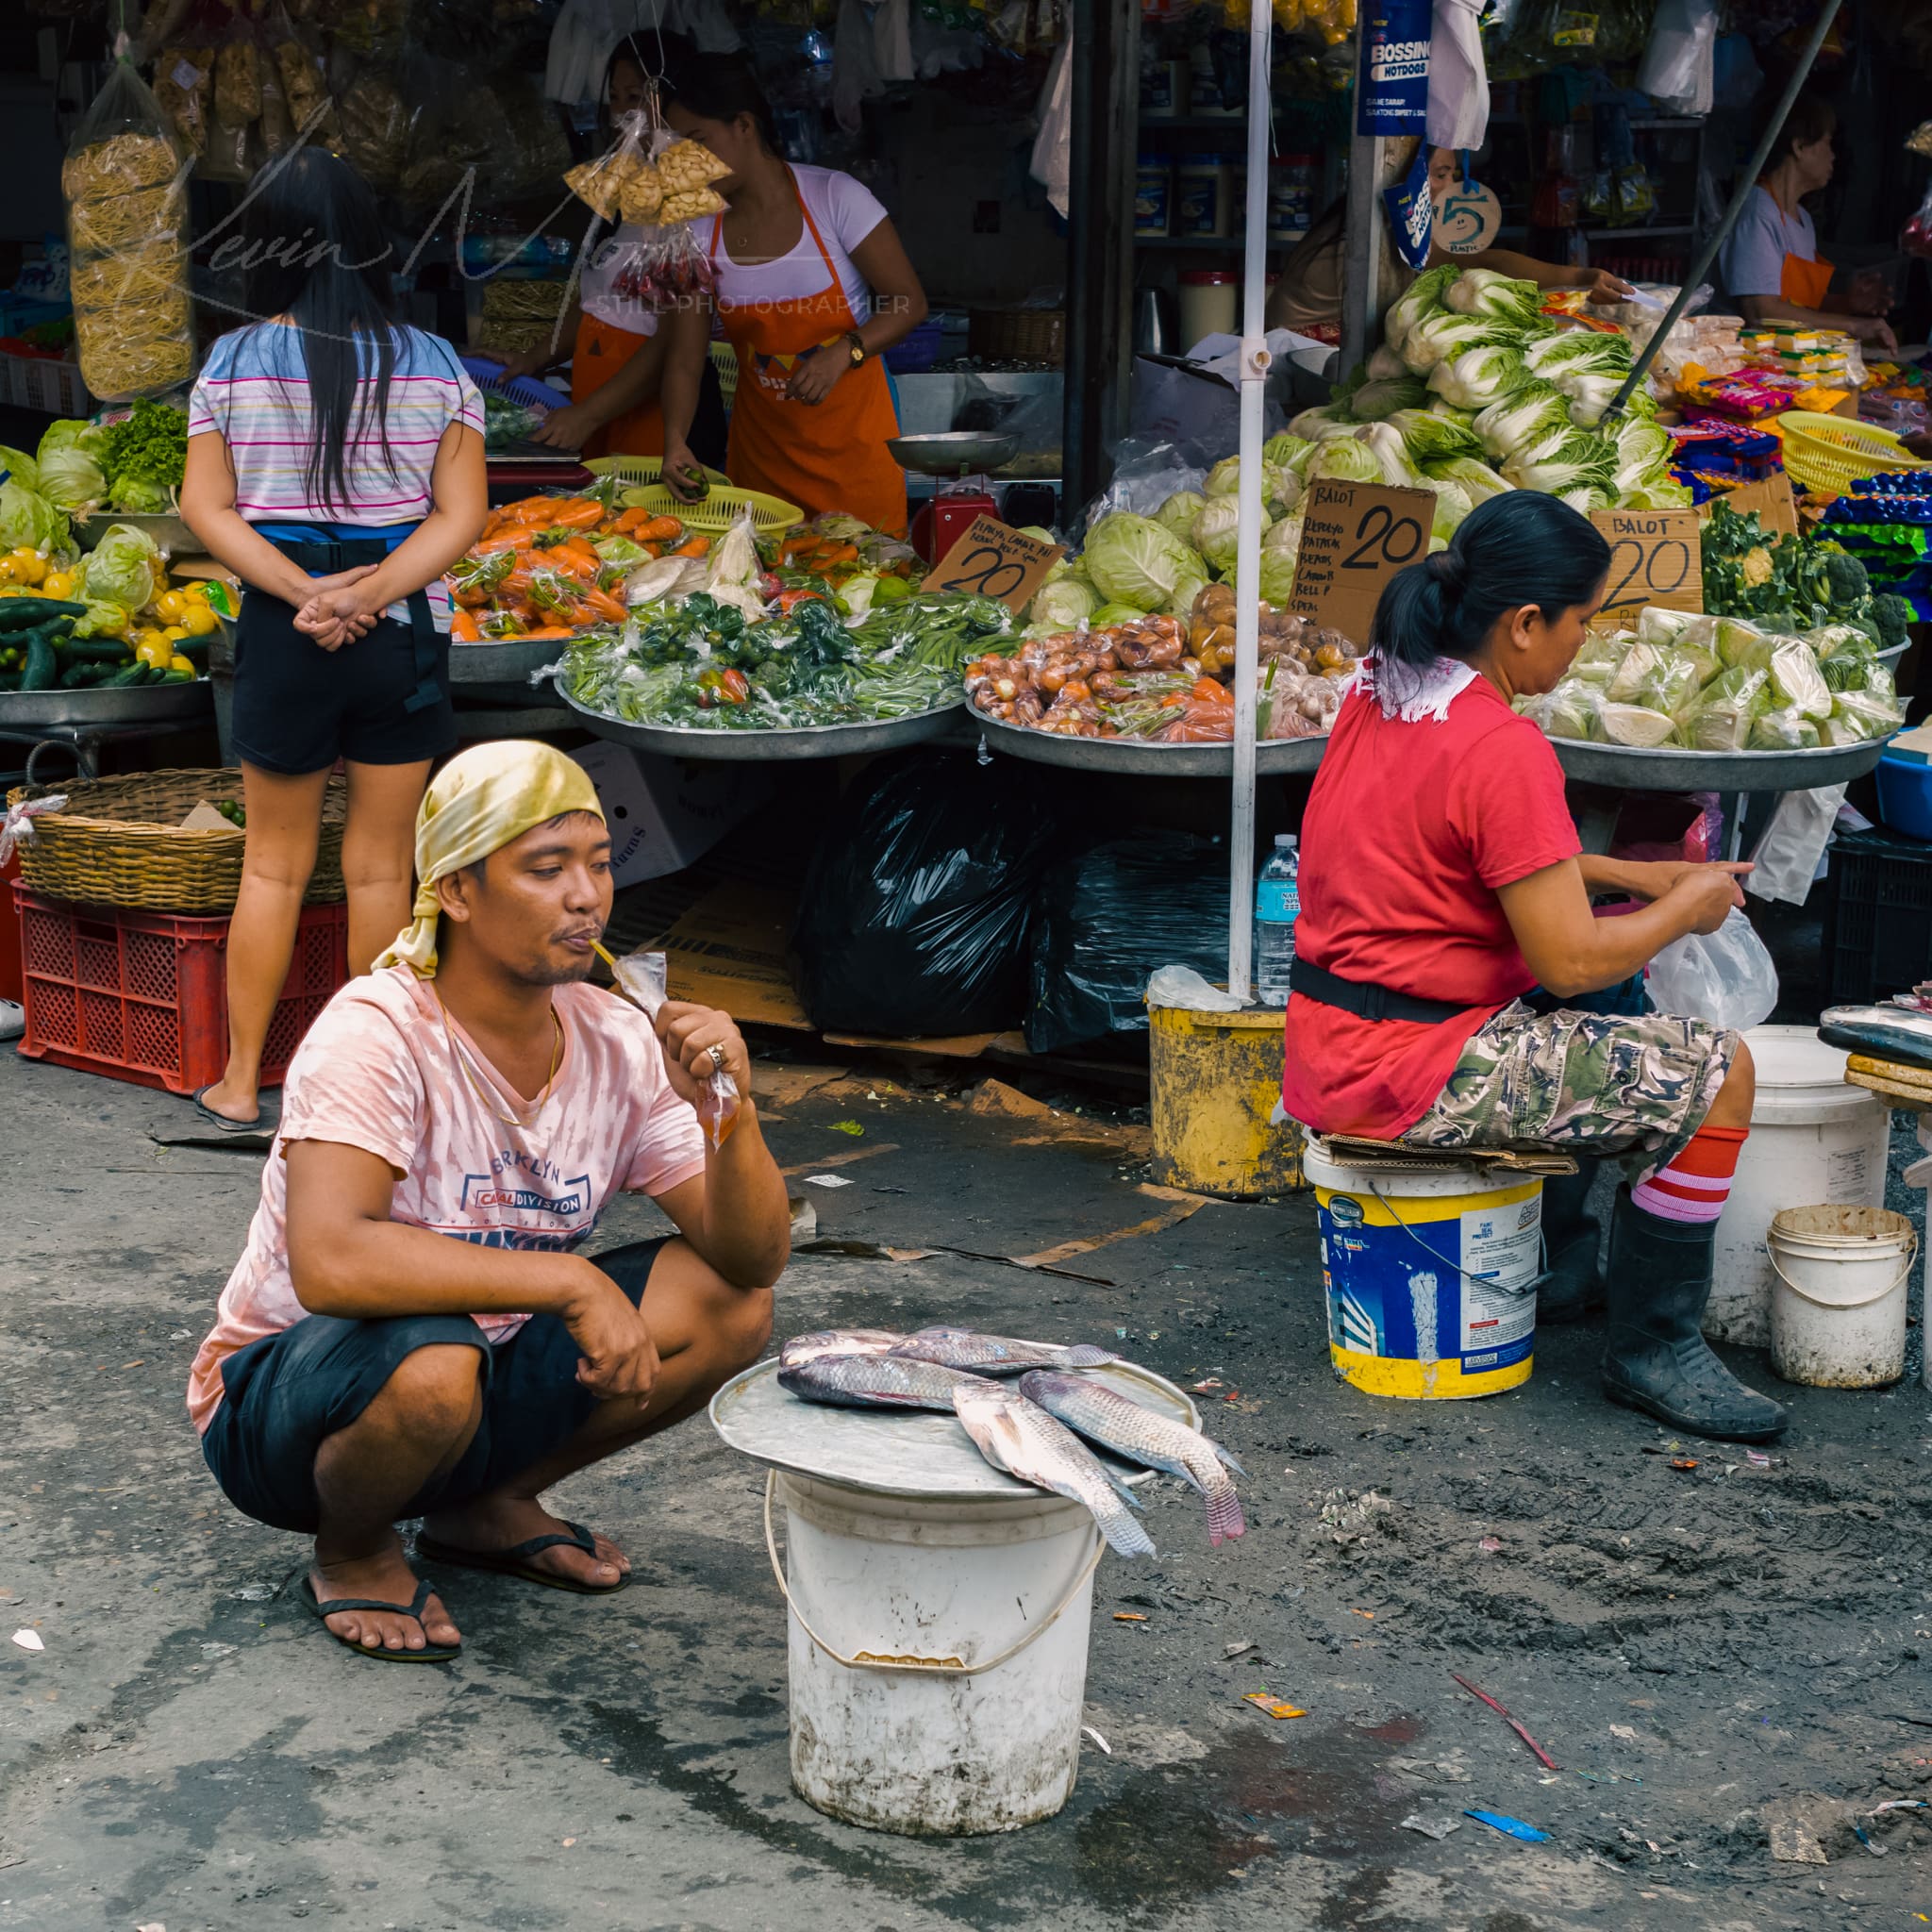 Man selling fresh fish amidst vibrant produce at a busy local market.